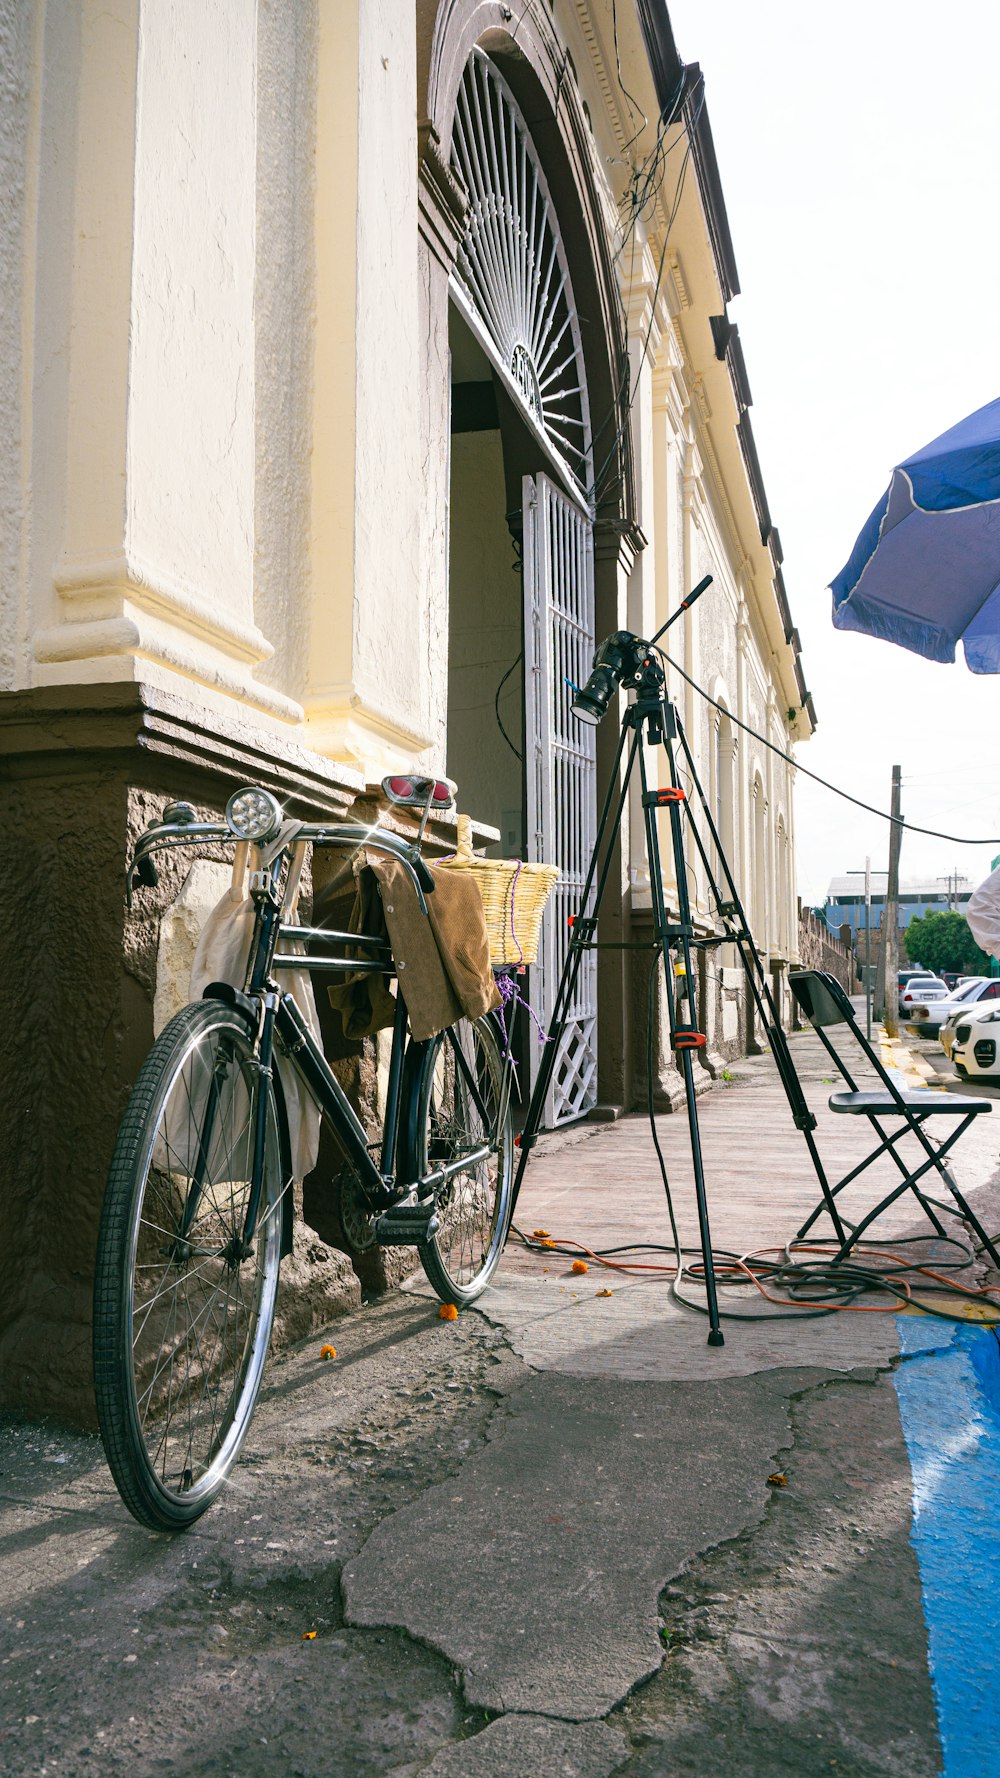 a bicycle parked outside of a building next to a blue umbrella